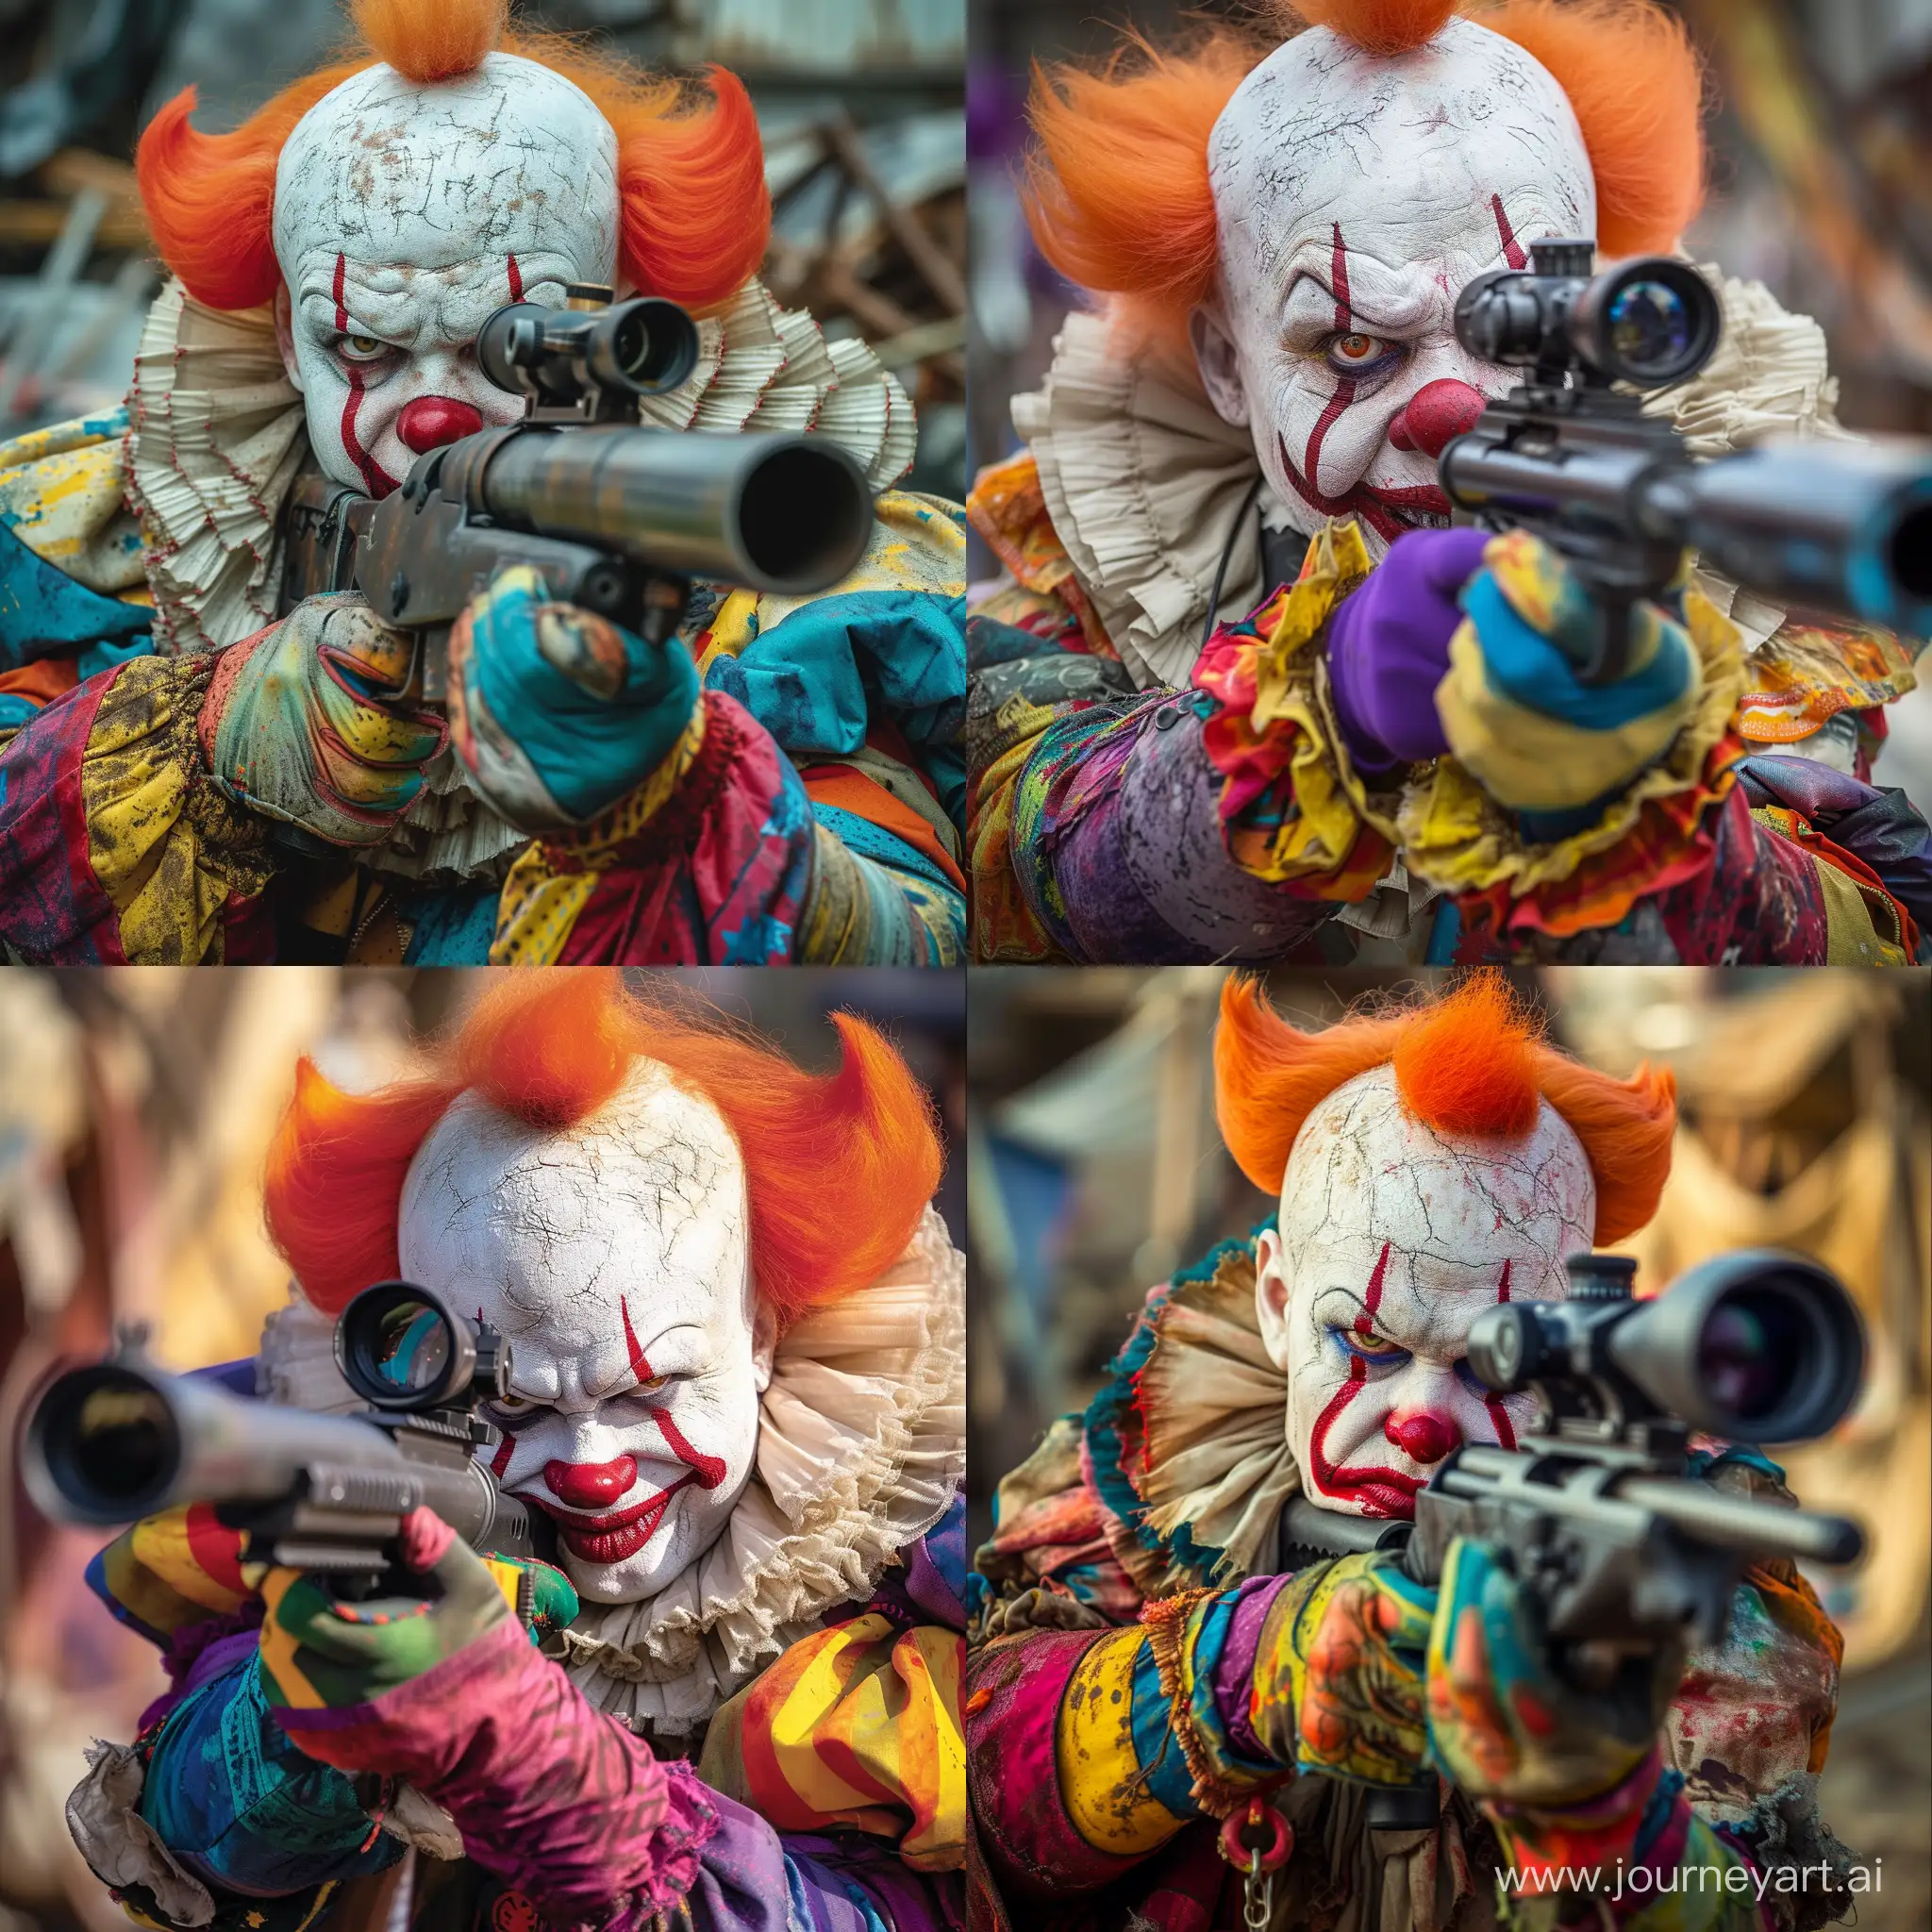 close-up of a person dressed as a clown holding what appears to be a firearm with an attached scope. The clown makeup features exaggerated red lips, a white face, and a balding head with tufts of orange hair on either side. He wears colorful costumes and gloves. The expression on the clown's face is menacing, blended with a hint of madness, which is in stark contrast to the typically joyful and humorous association with clowns. The setting seems to be chaotic, with a blurred background that gives the impression of a disordered or post-apocalyptic environment.